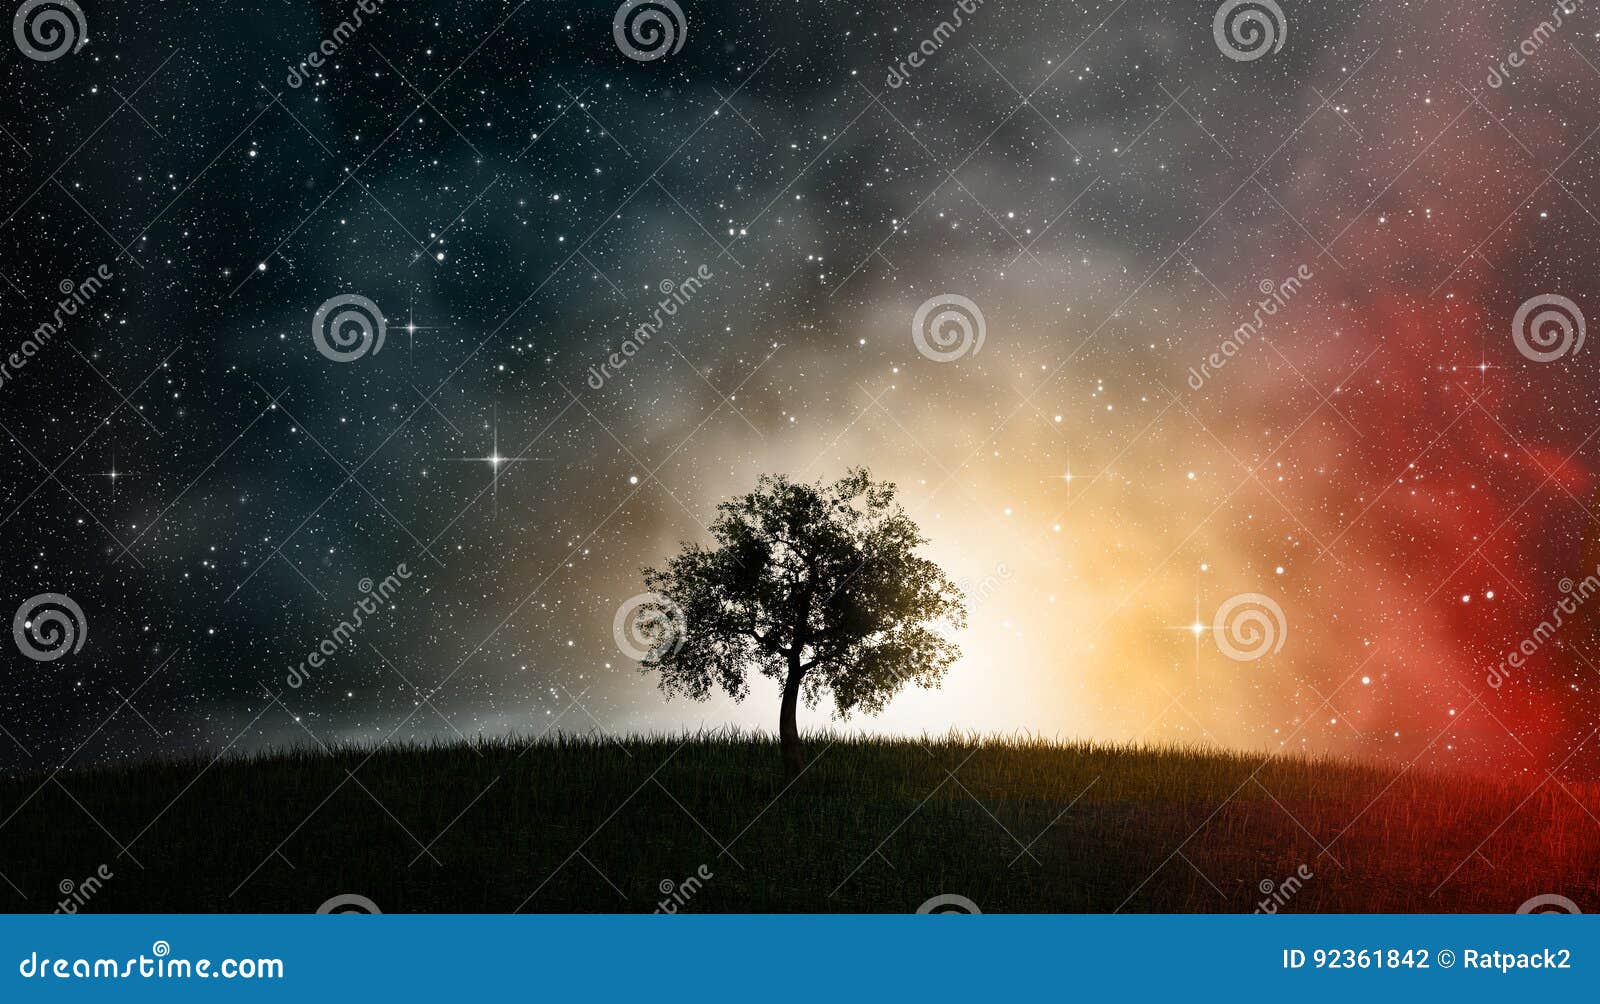 tree of life in front of night sky cosmos